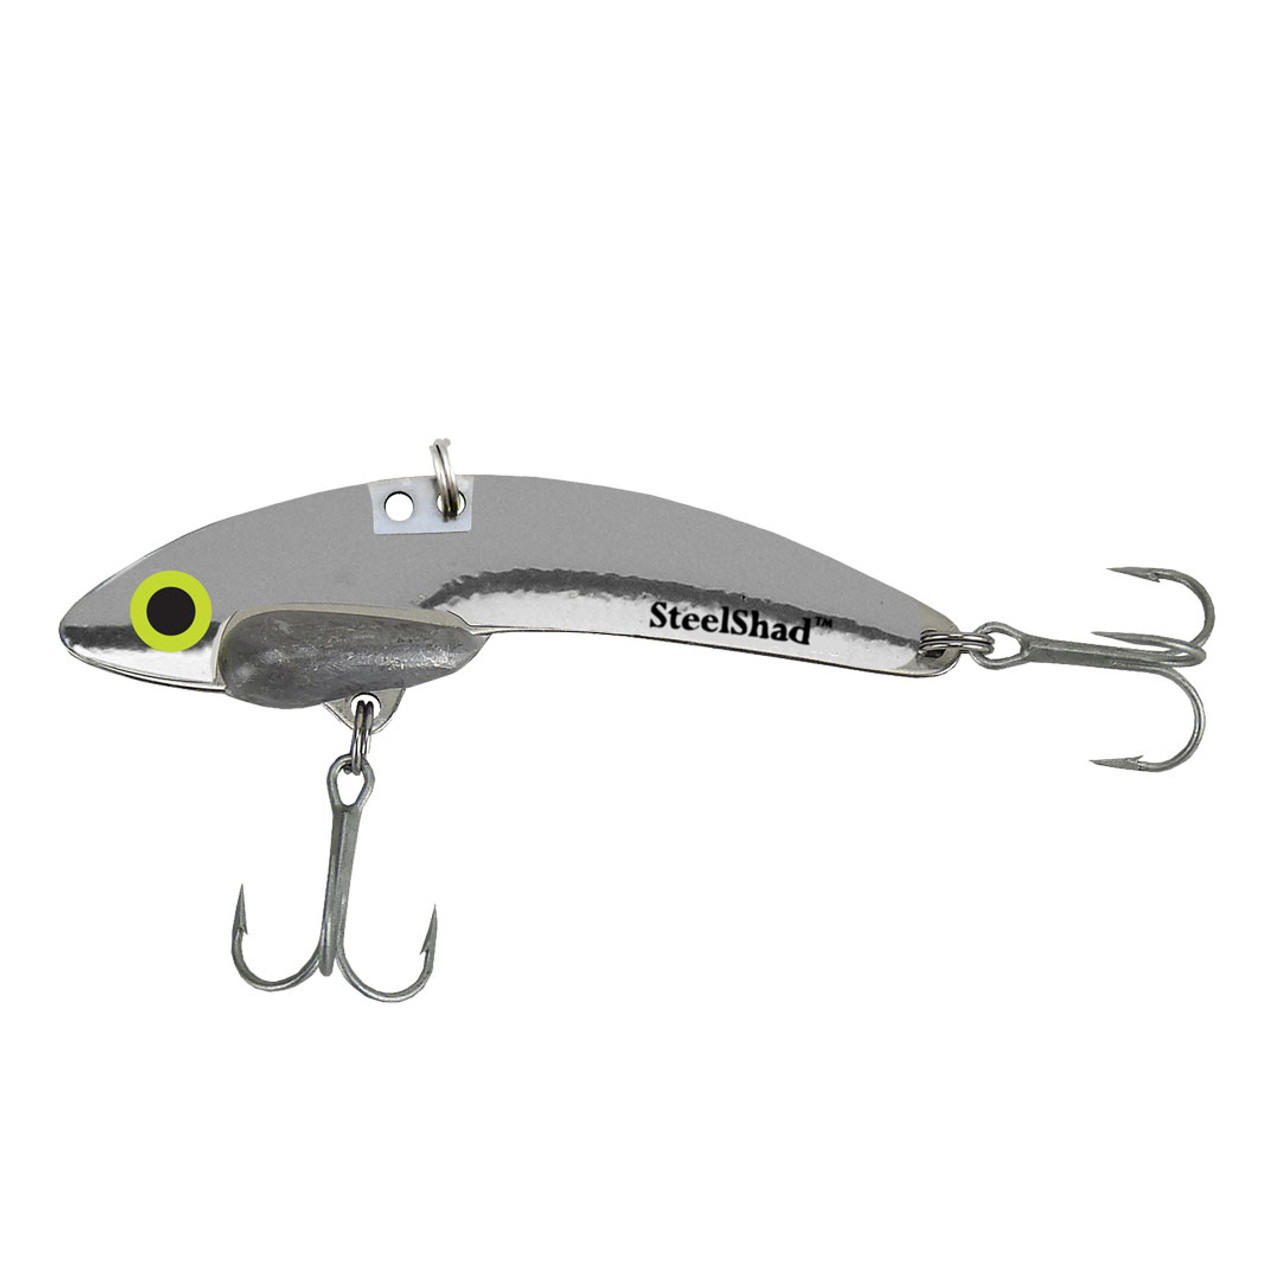 The Original SteelShad 3/8 oz. best selling, SteelShad Silver blade bait. Your go to dying chrome bait fish. 440 grade stainless steel, 3/8 oz., #6 VMC hooks coated for fresh and salt water, 2 3/4 inches long.